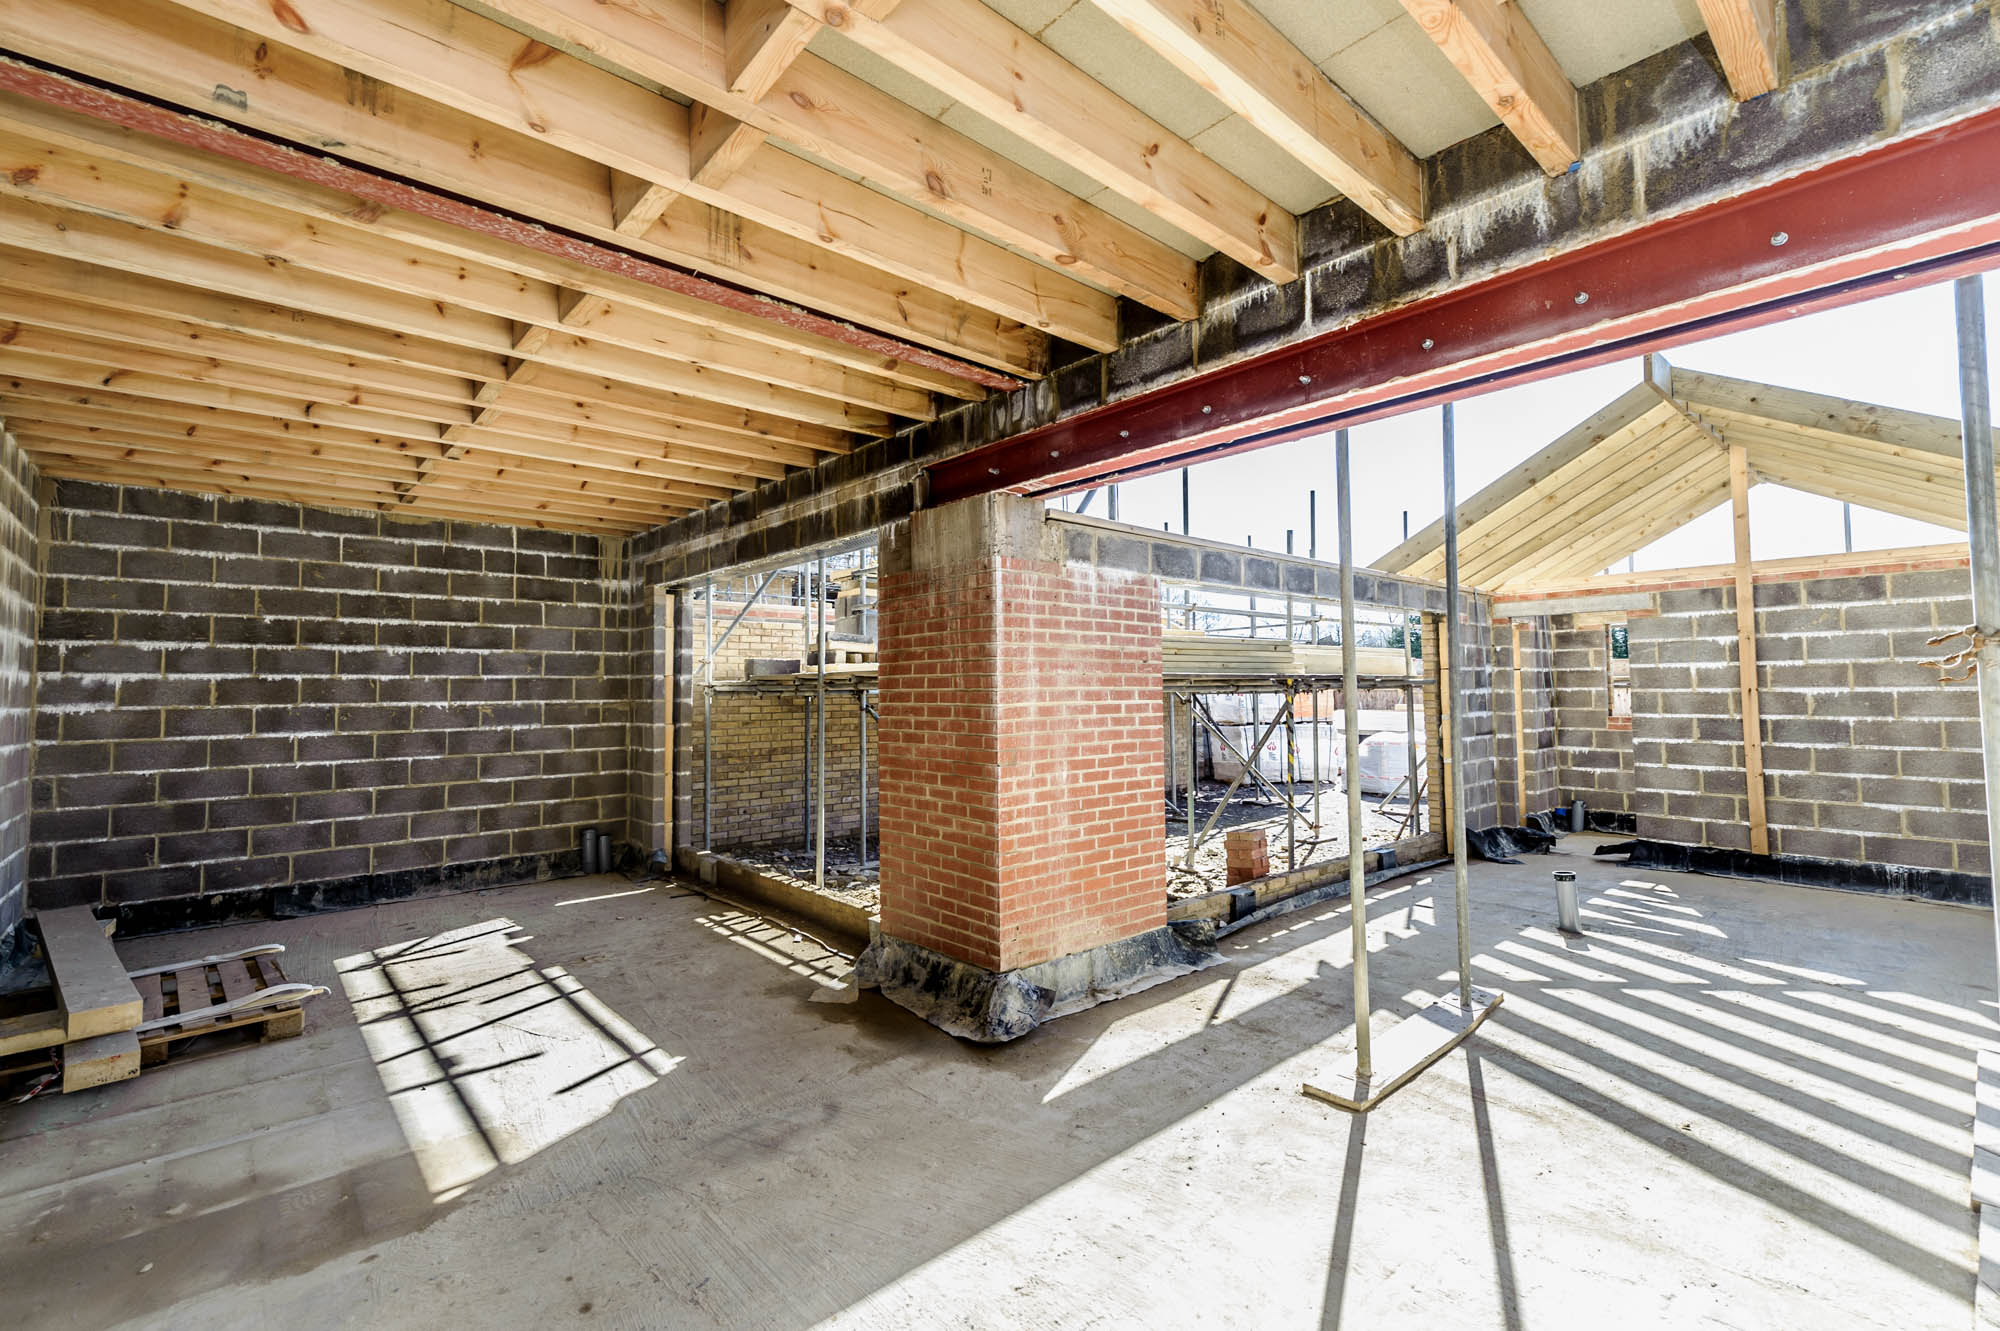 A photo of the interior of a house during the building stage showing beams, bricks and lintels